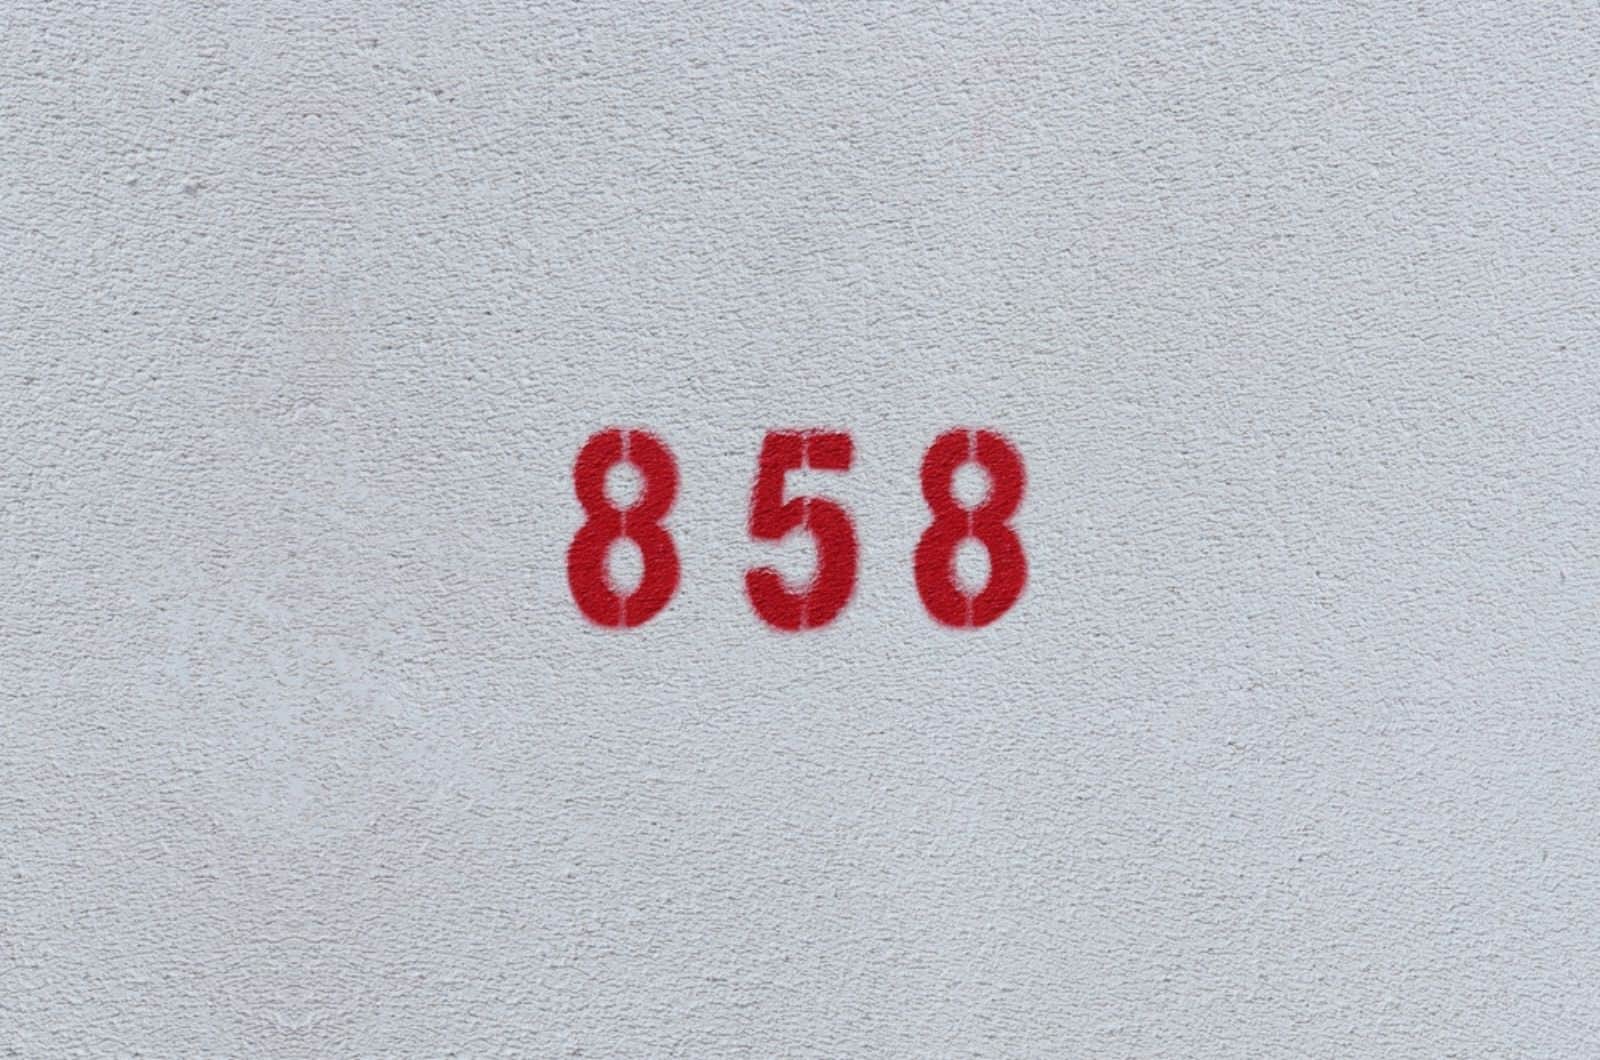 RED Number 858 on the white wall